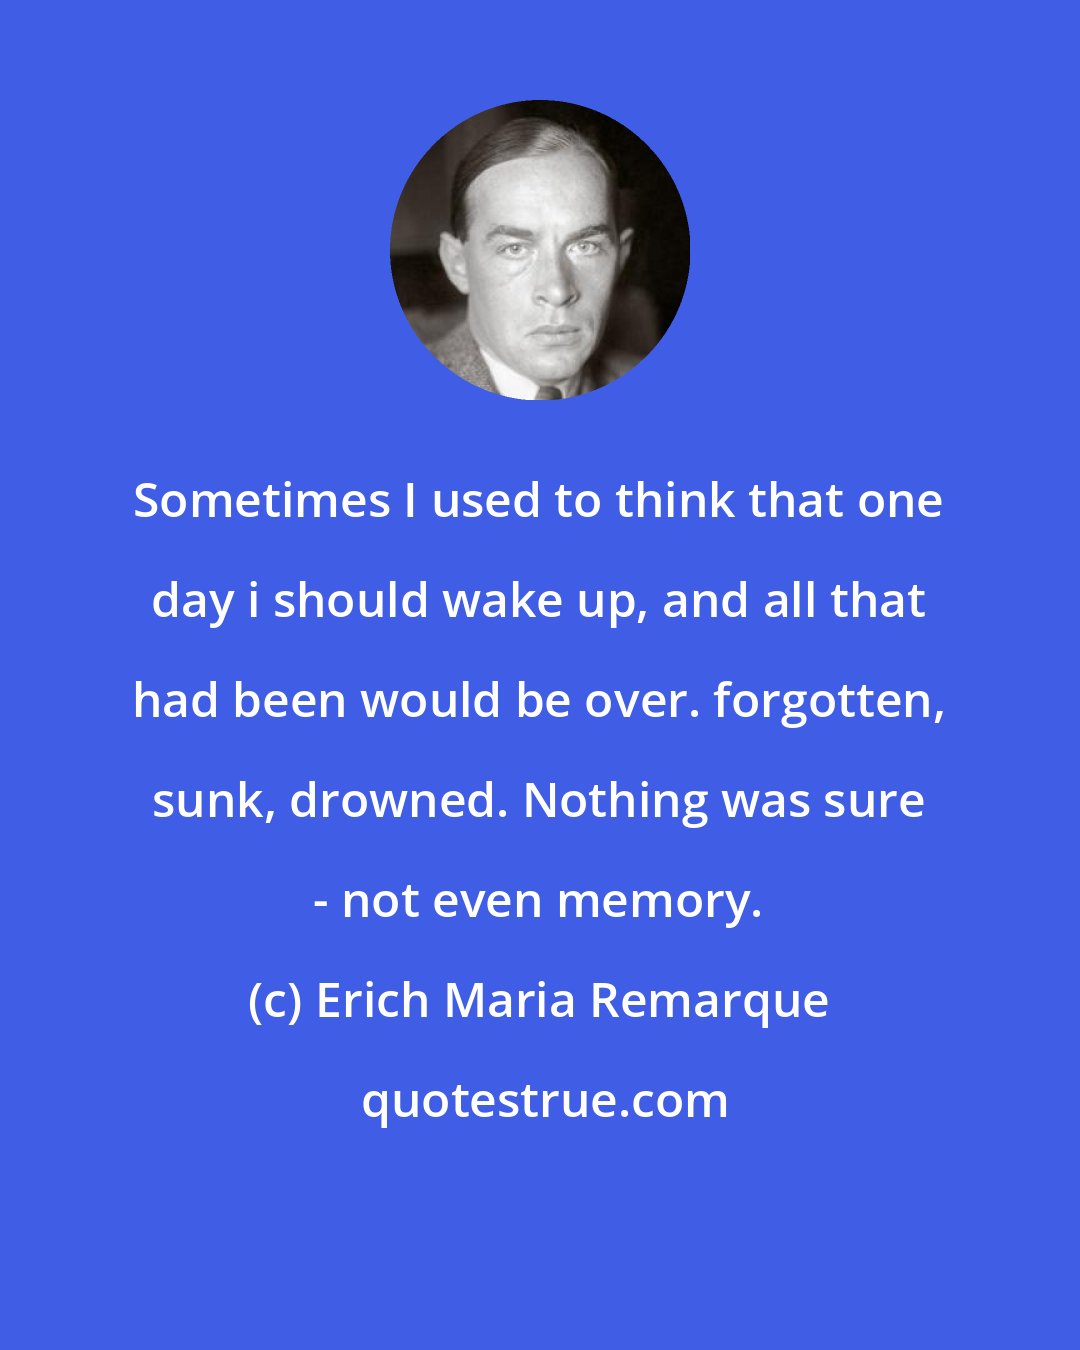 Erich Maria Remarque: Sometimes I used to think that one day i should wake up, and all that had been would be over. forgotten, sunk, drowned. Nothing was sure - not even memory.